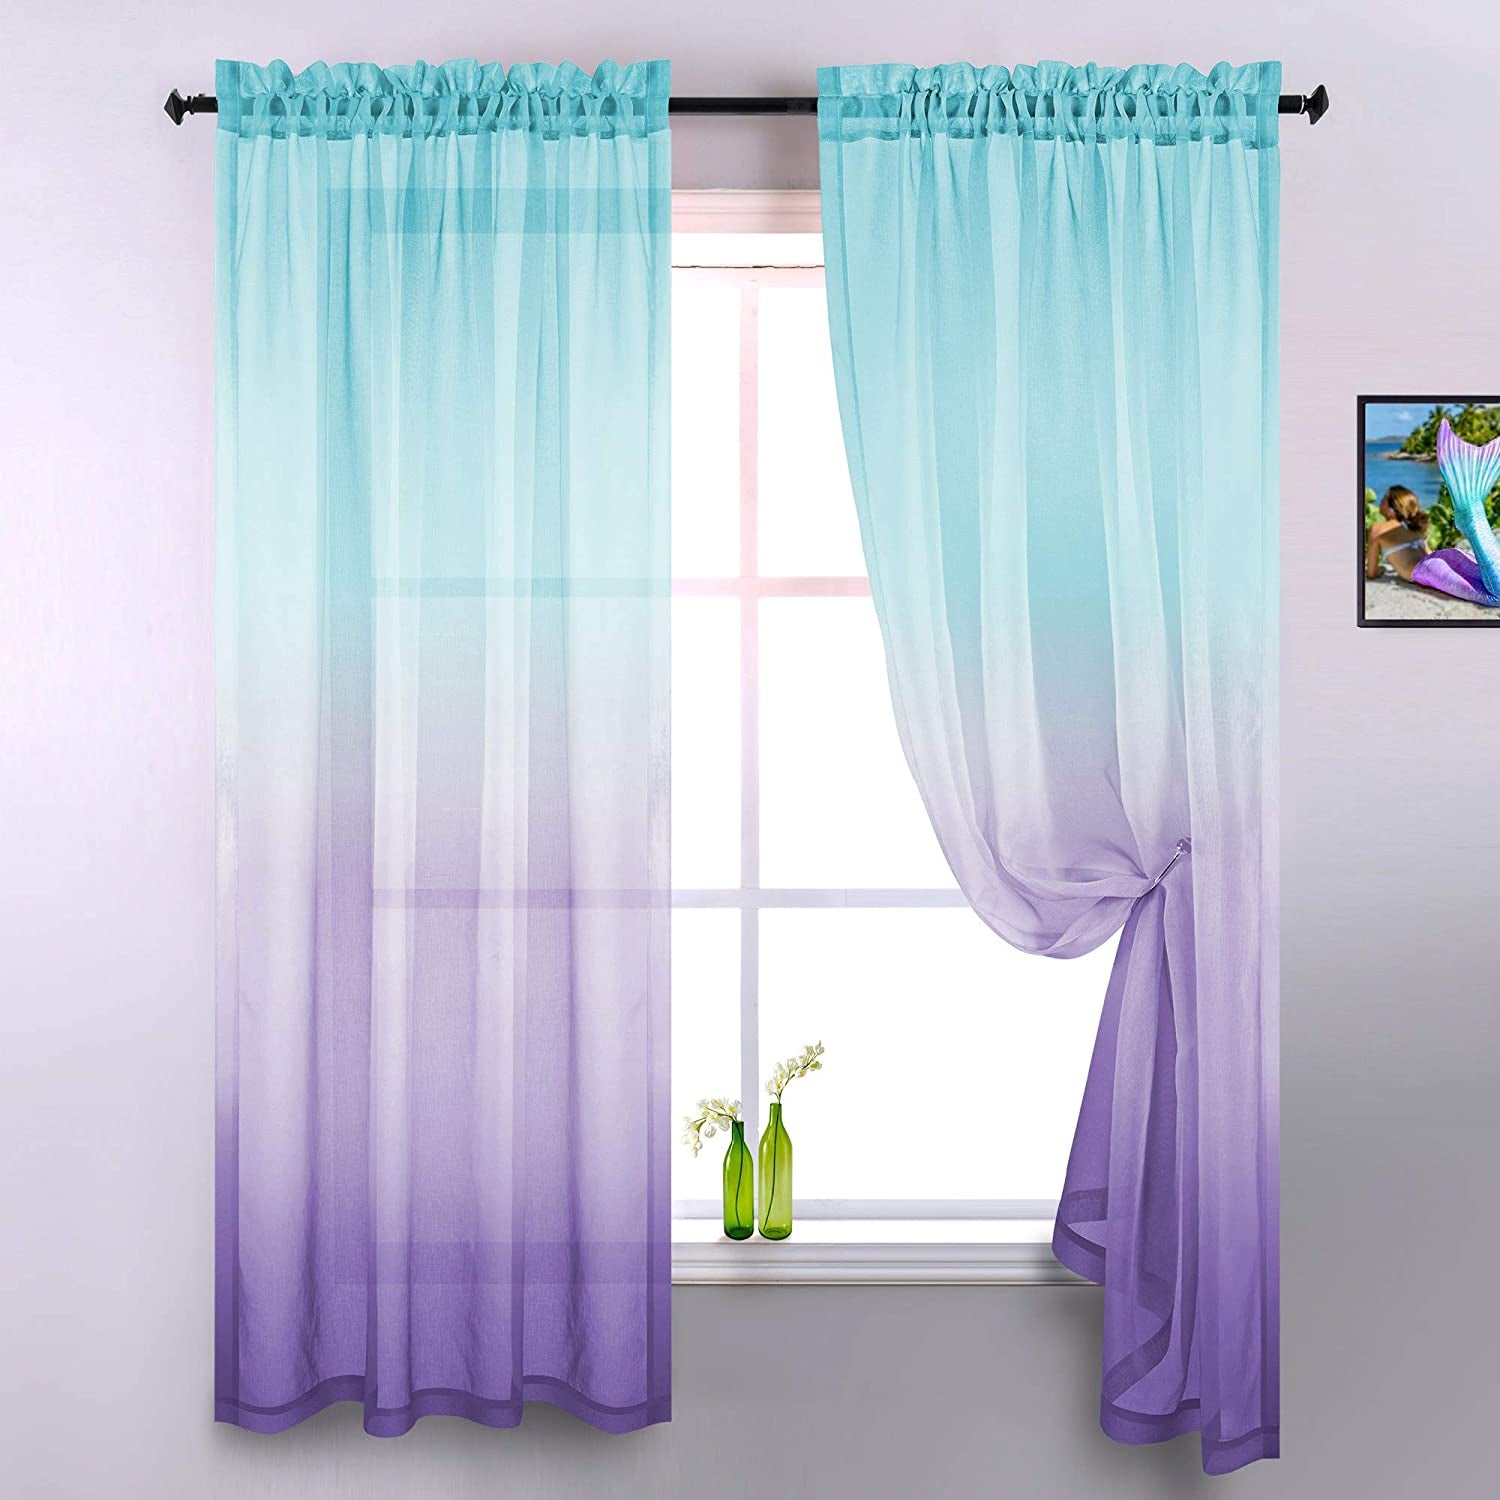 KOUFALL 84 Inch Light Blue Room Darkening Blackout Curtains and Green and Purple Ombre Sheer Curtains Bundle for Living Room Bedroom  KOUFALL   